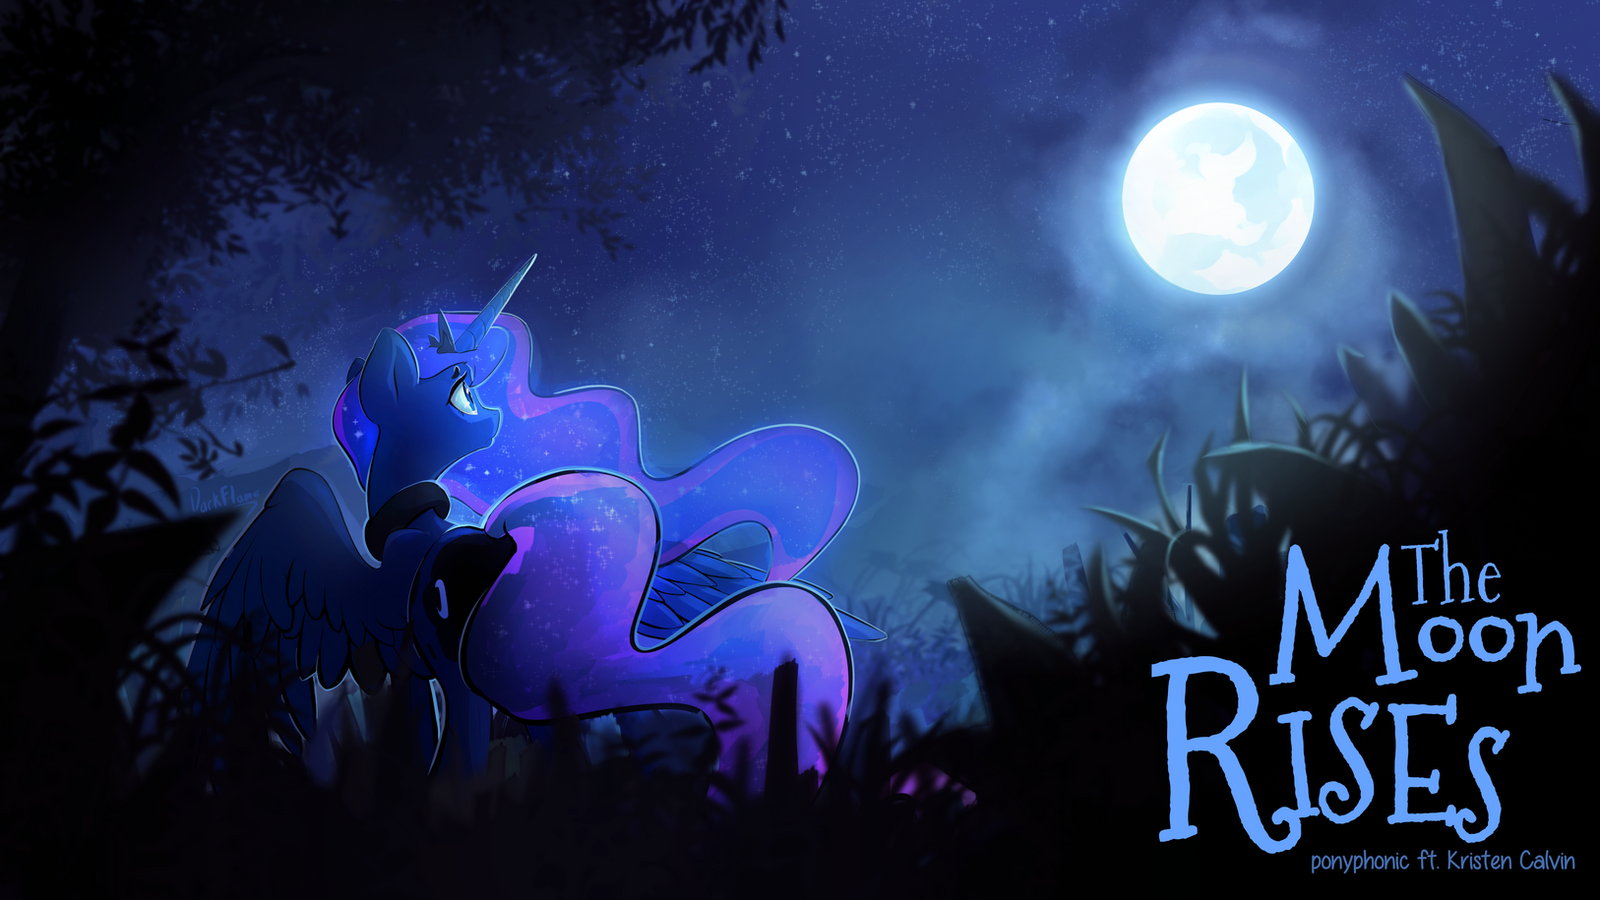 The Moon Rises by DarkFlame75 on DeviantArt